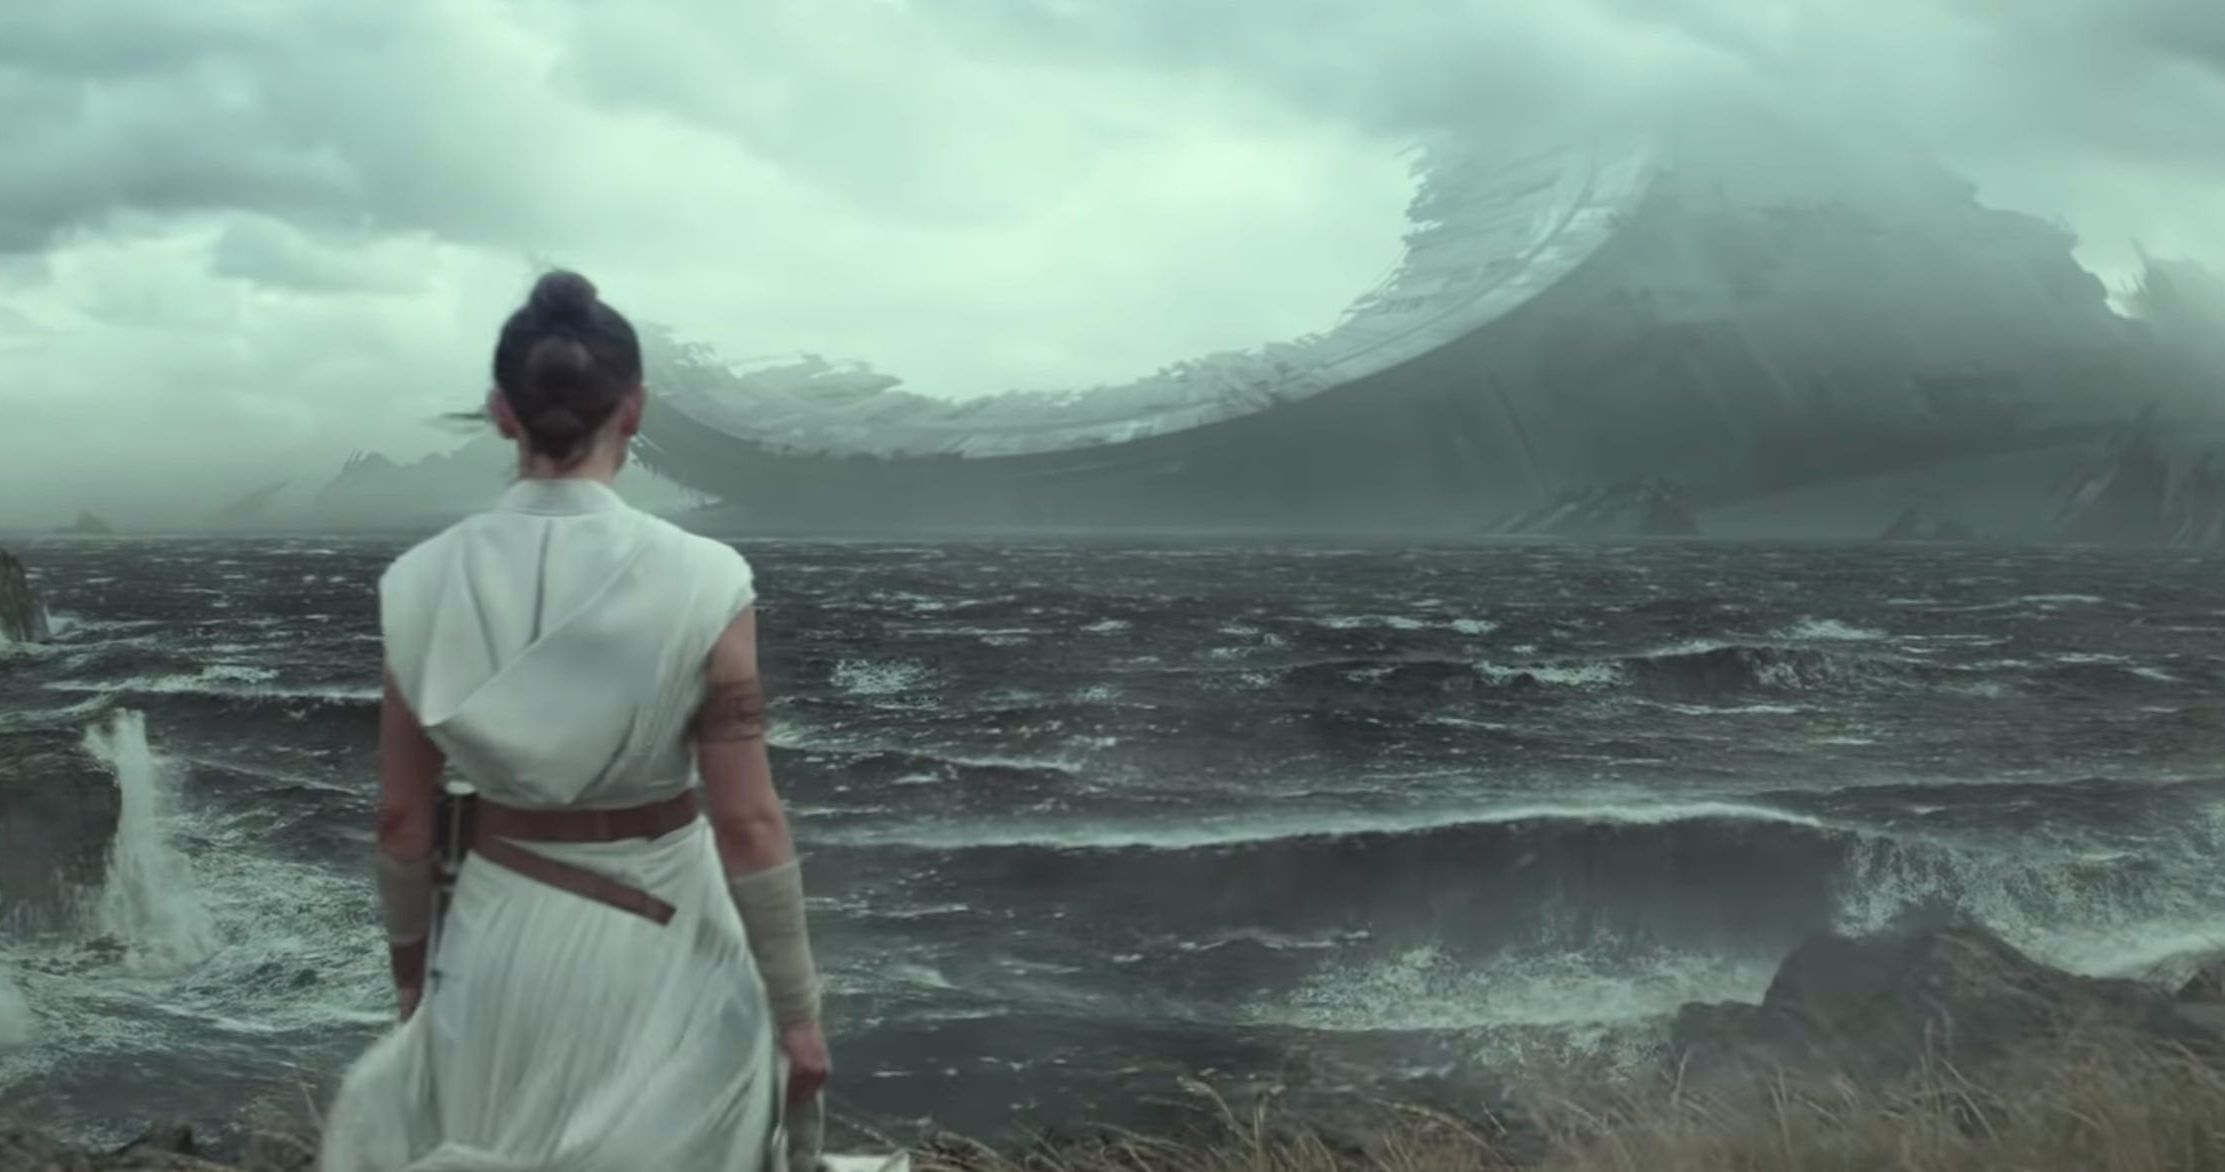 What's Really Going on with the Death Star in Rise of Skywalker?